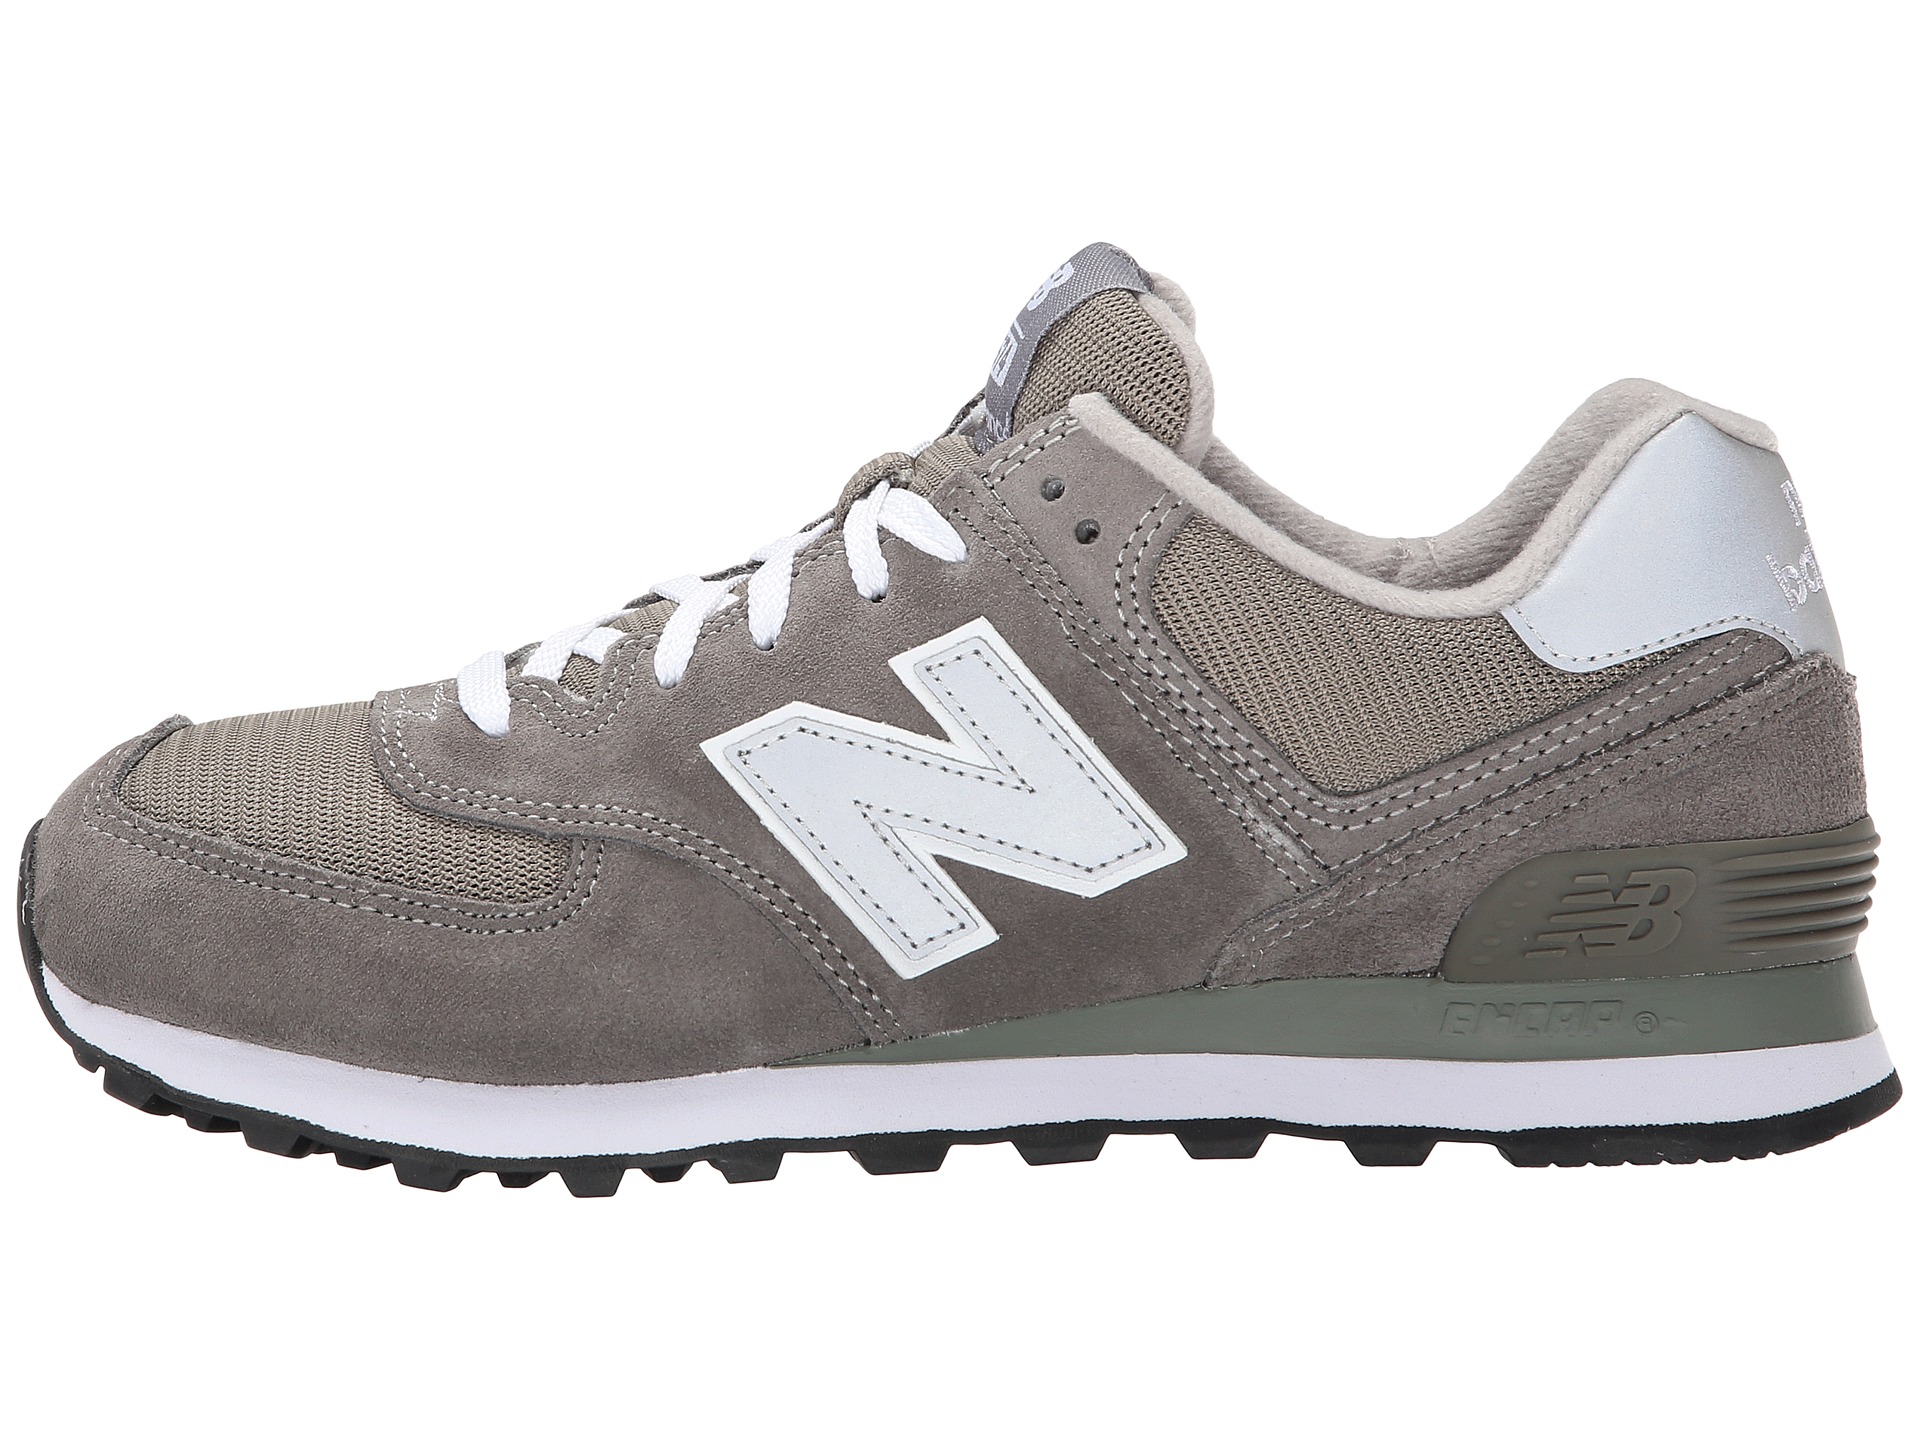 Leather Sandals For Men: Zappos New Balance